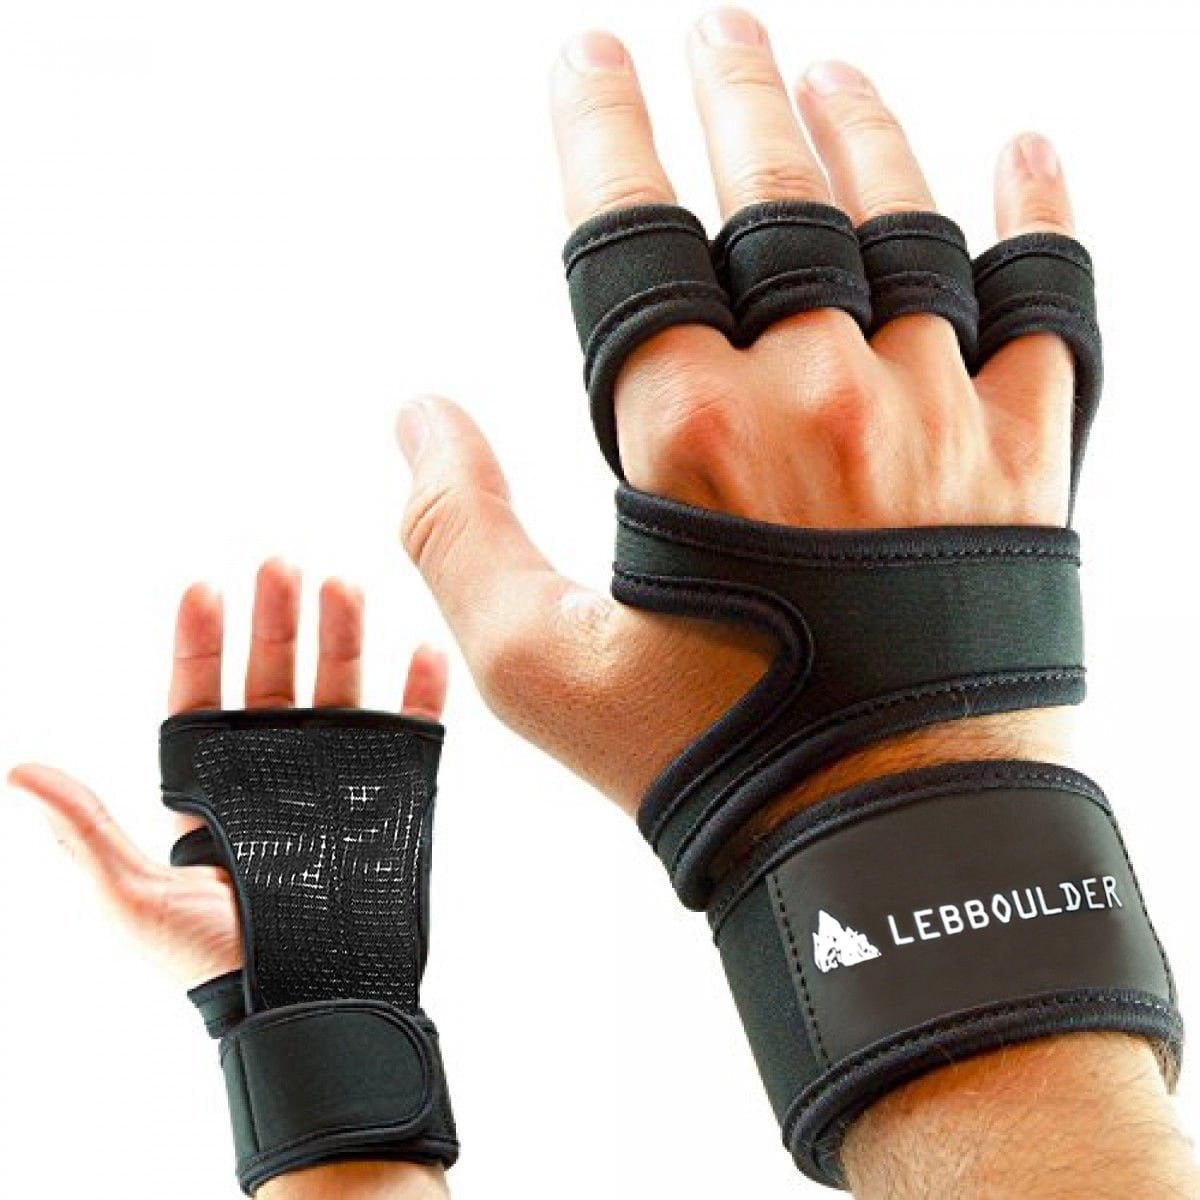 Crossfit Gloves Exercise Training Wrist Weight Lifting Gloves For Men Women New 